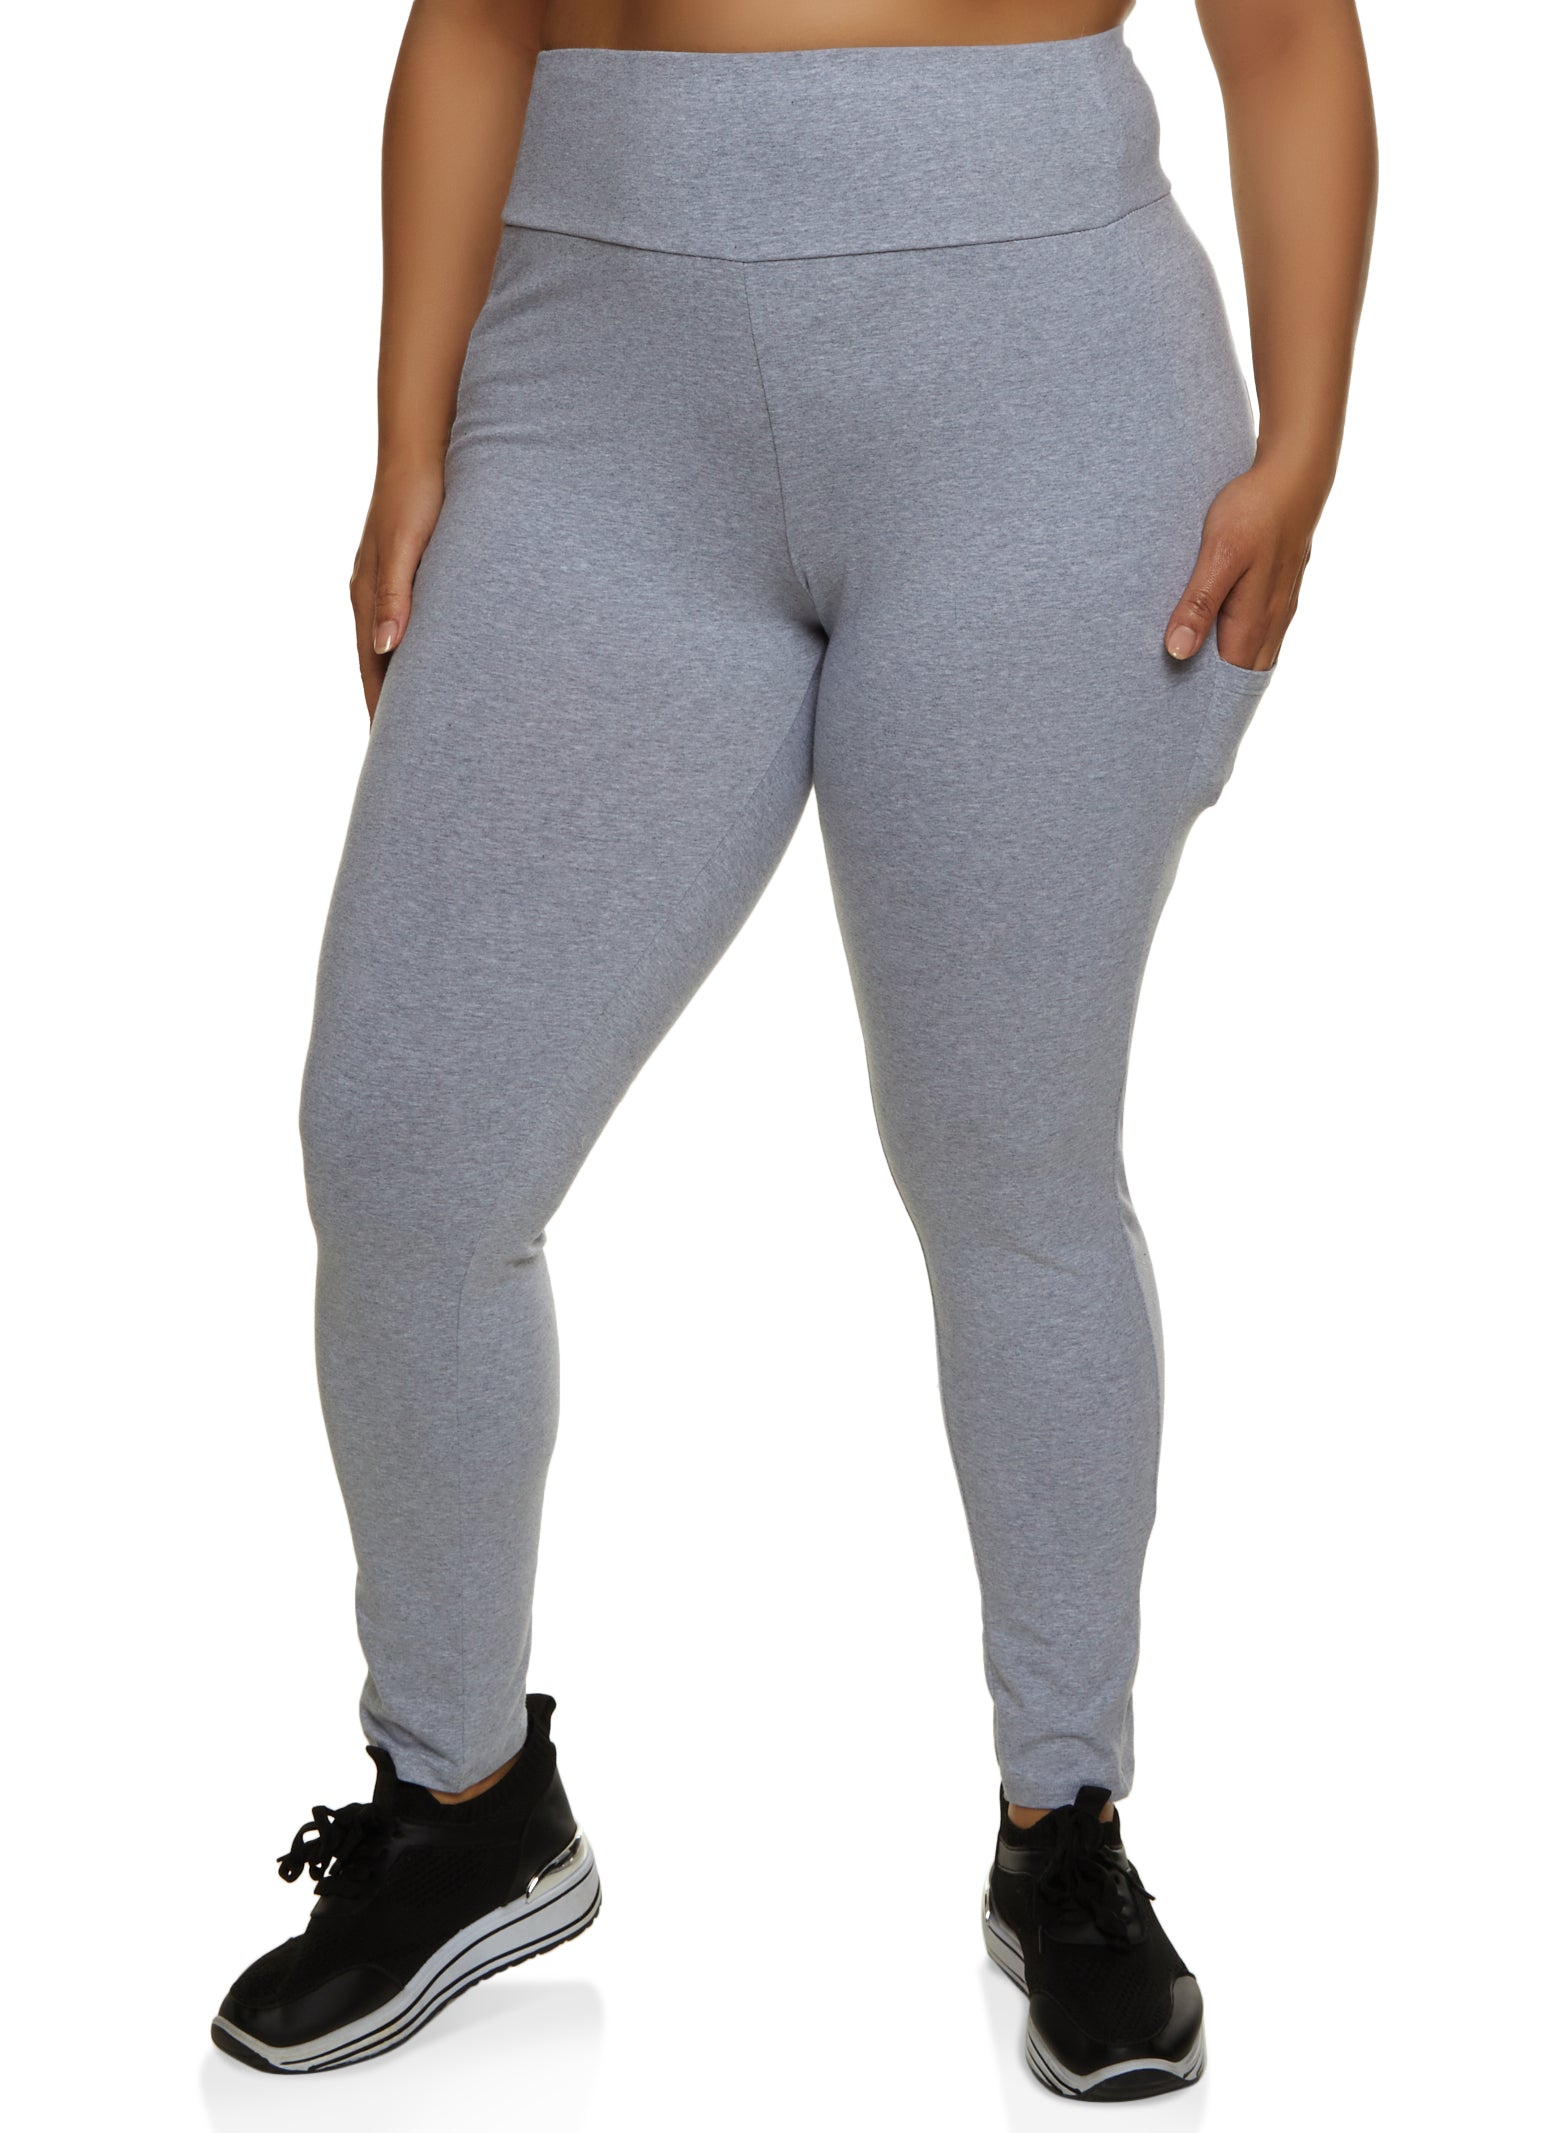 Plus Size Solid High Waist Cell Phone Pocket Leggings - Gray